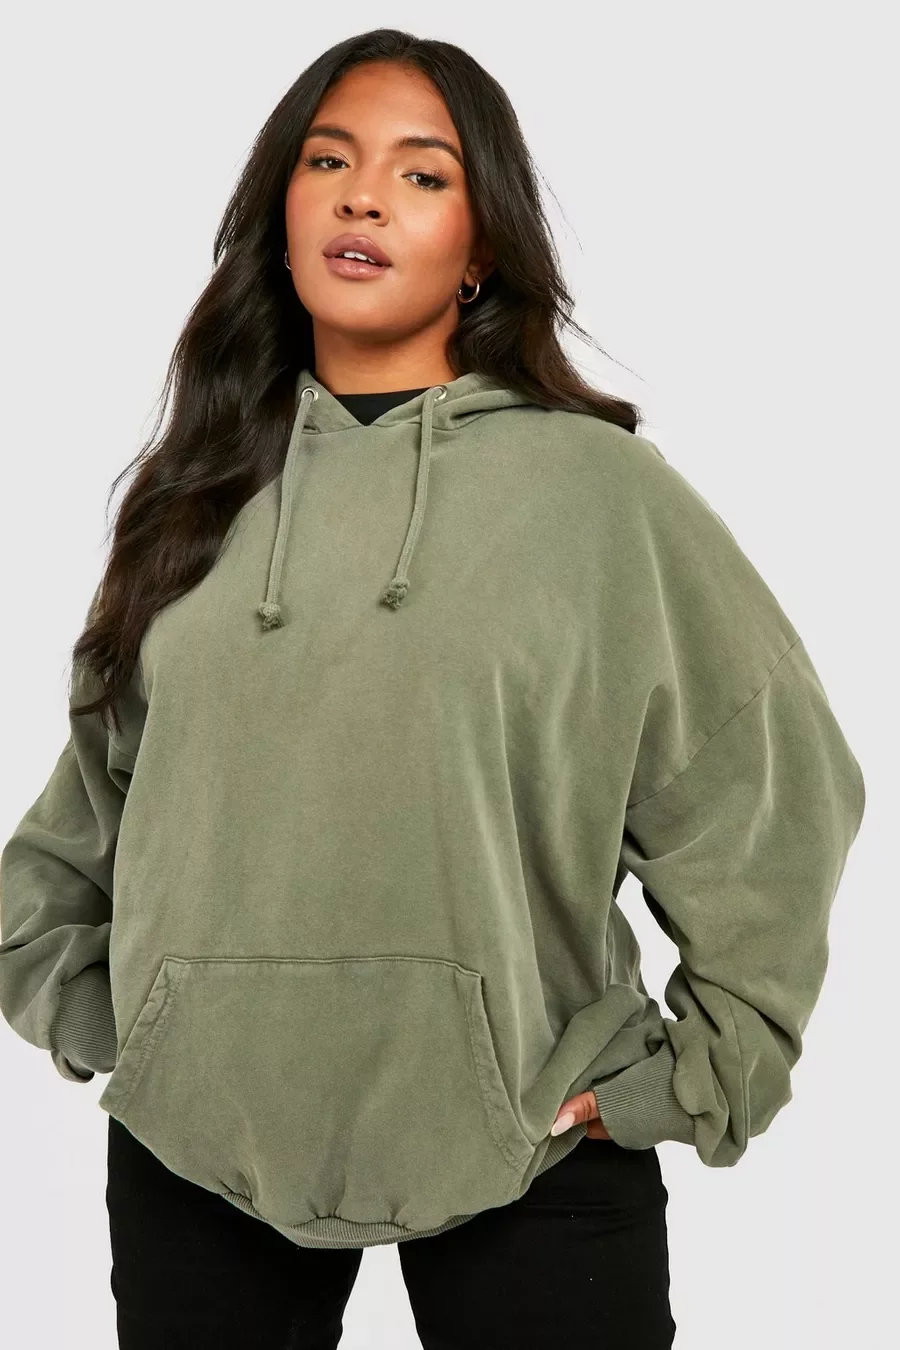 Oversized Hoodies - Comfy and Casual